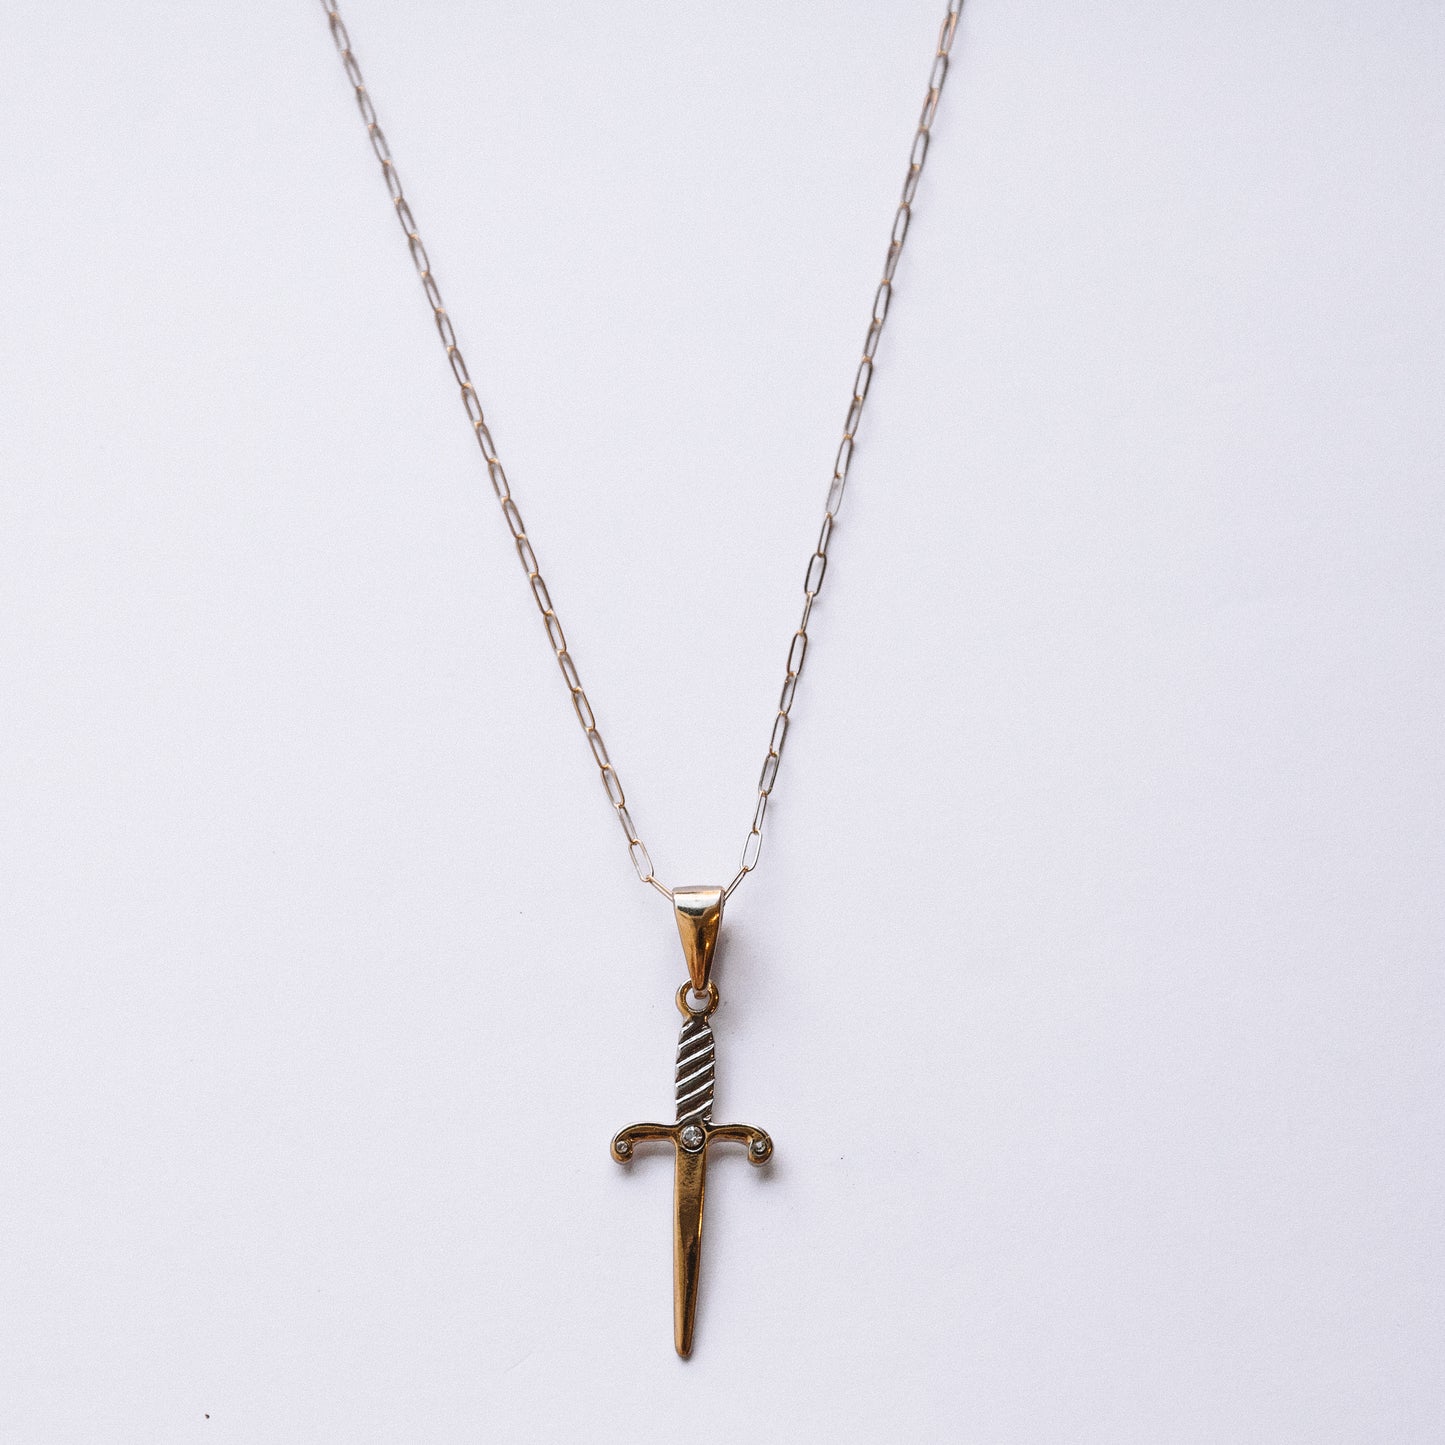 The Sword Necklace